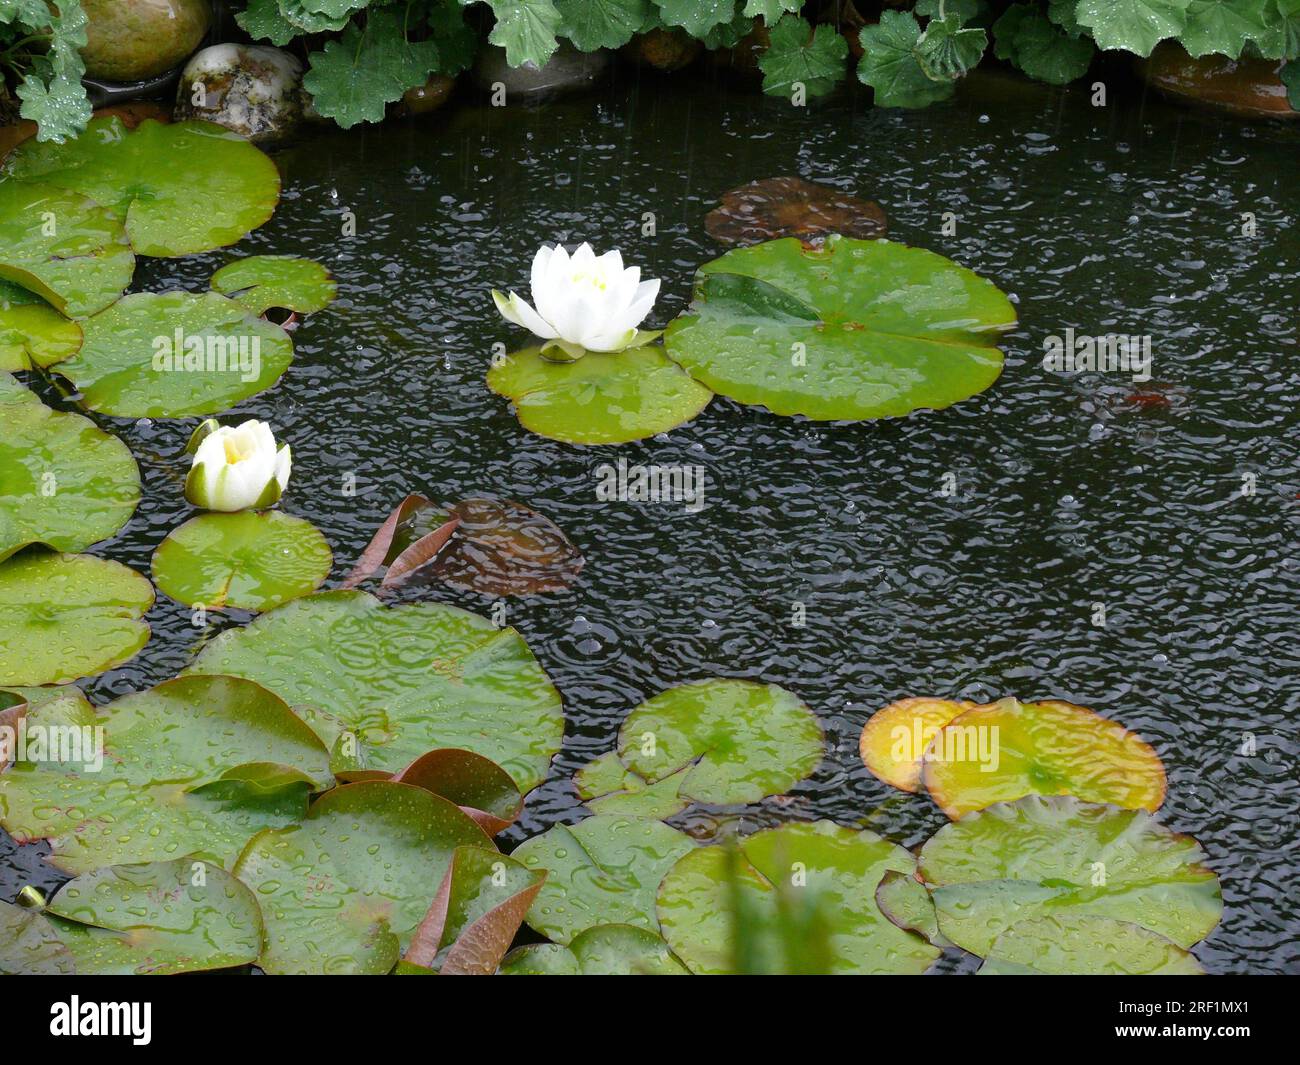 White water lily in garden pond in heavy rain, water droplets Stock Photo